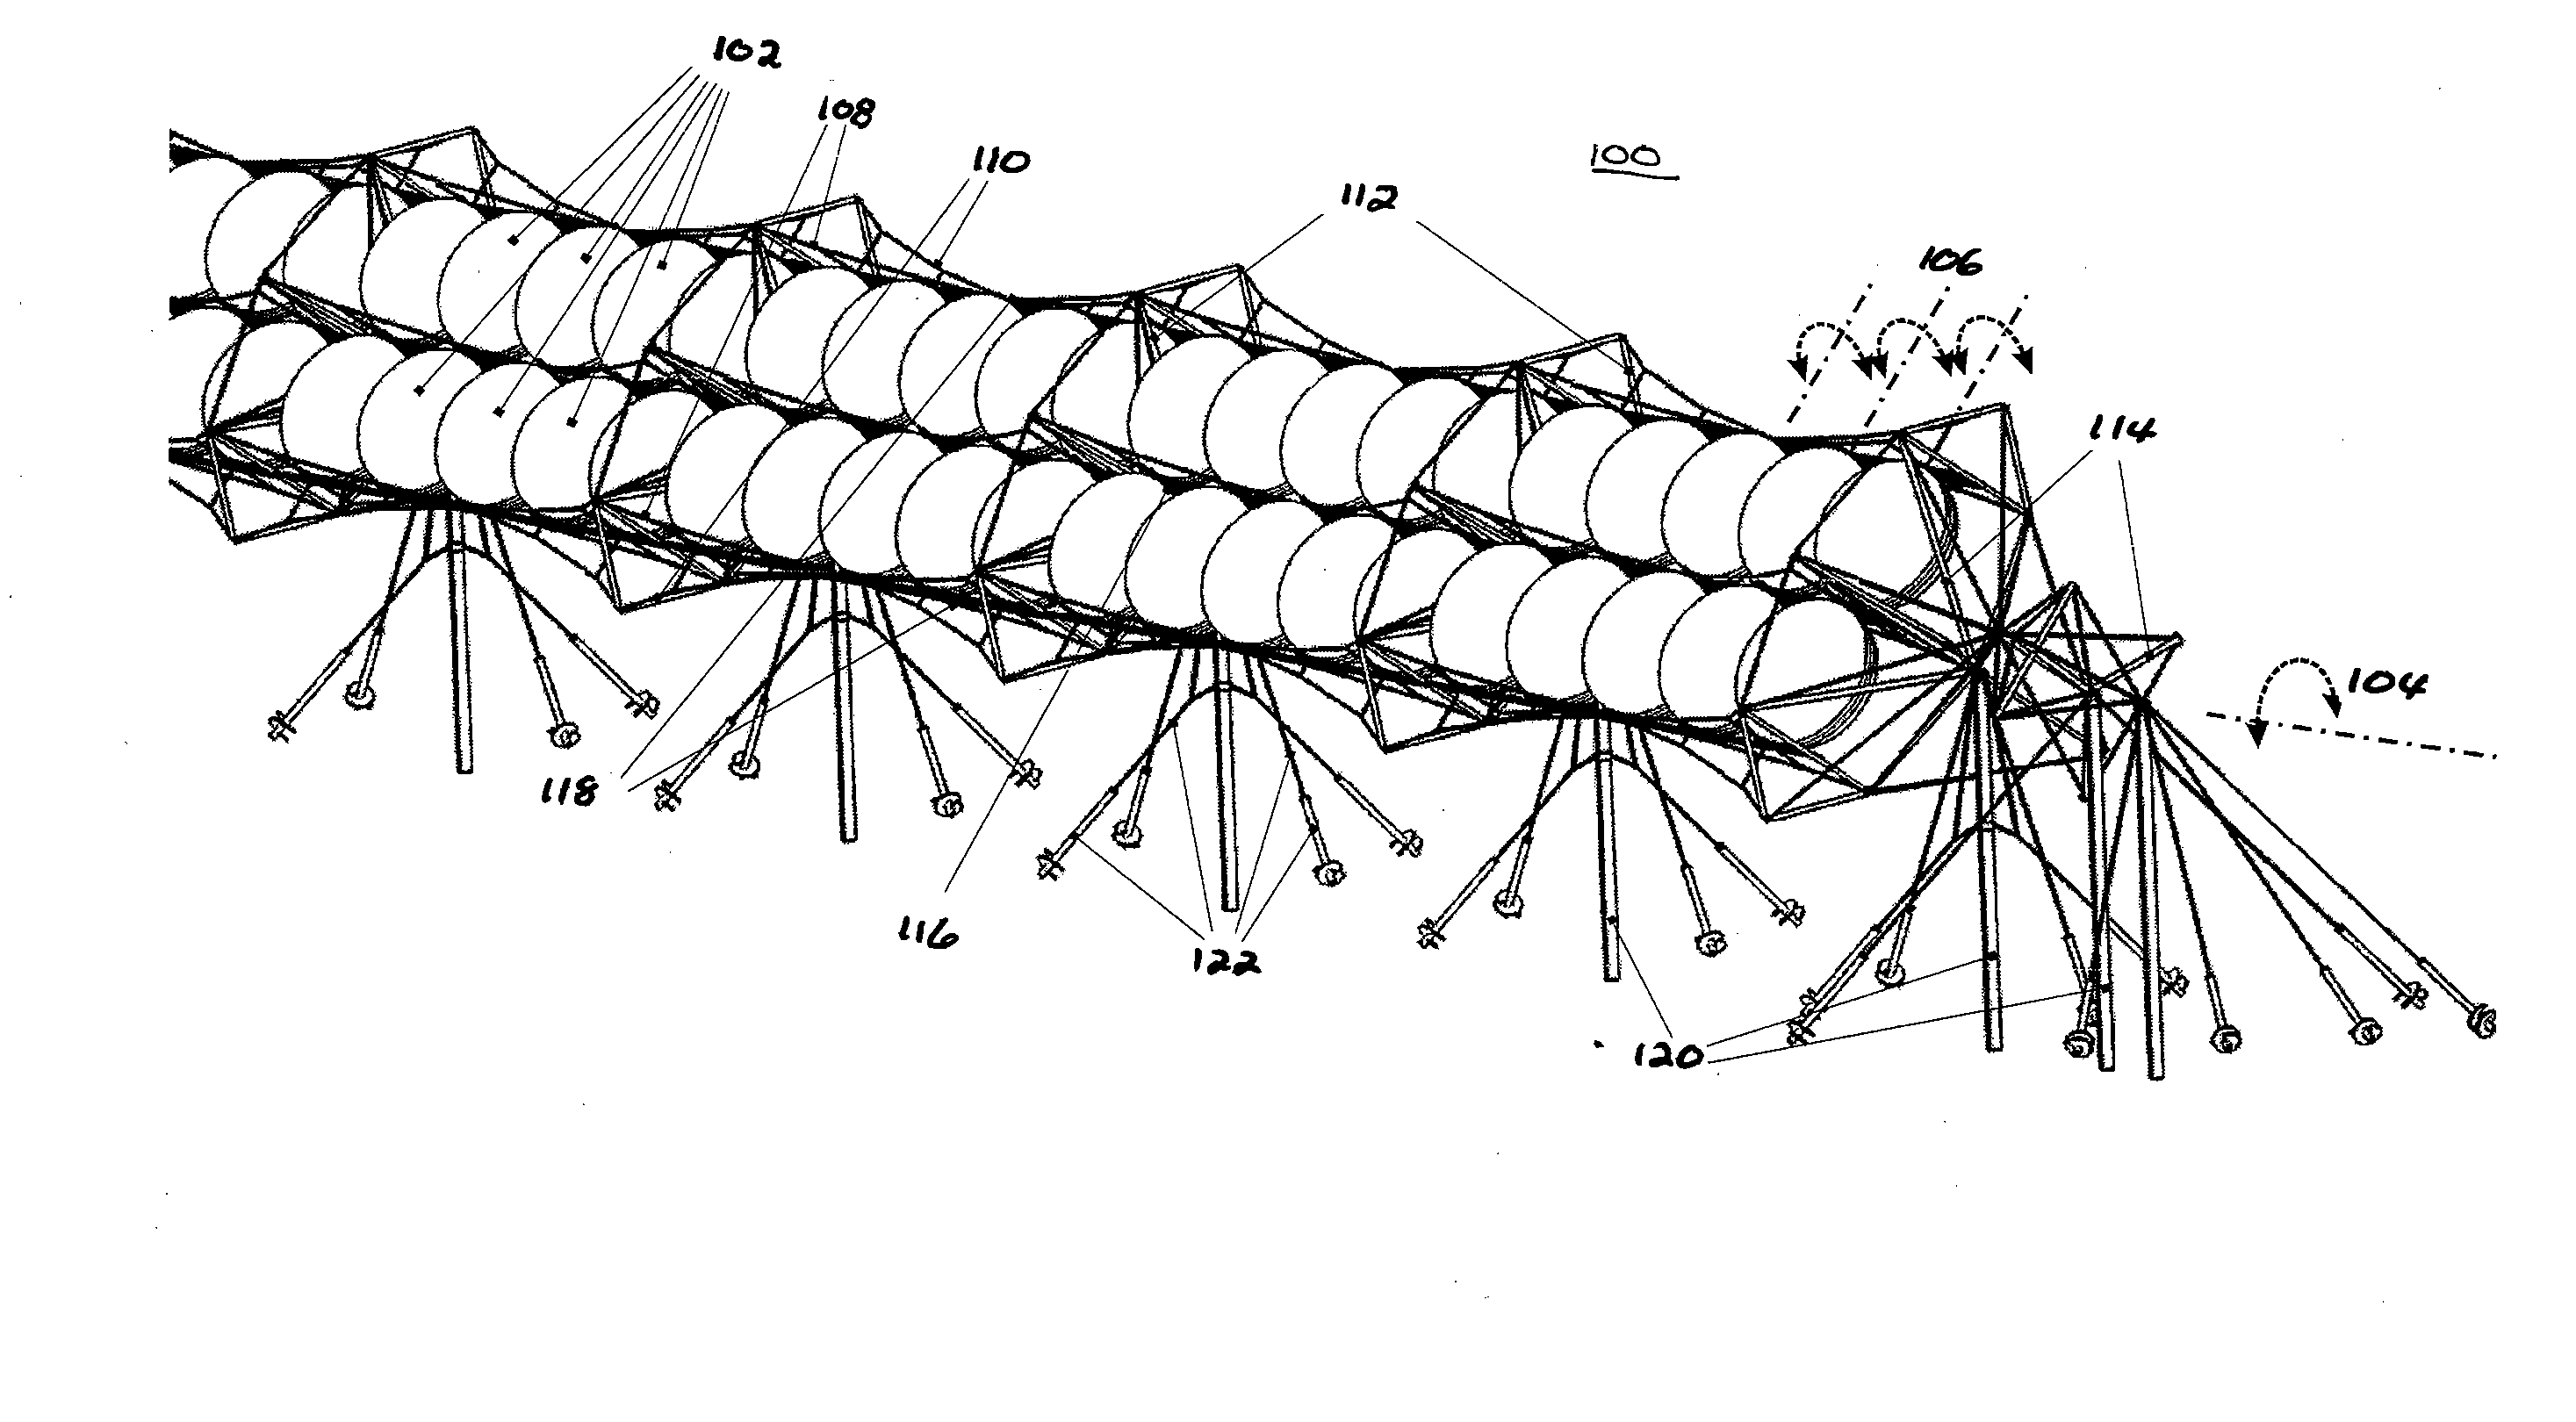 Rigging system for supporting and pointing solar concentrator arrays